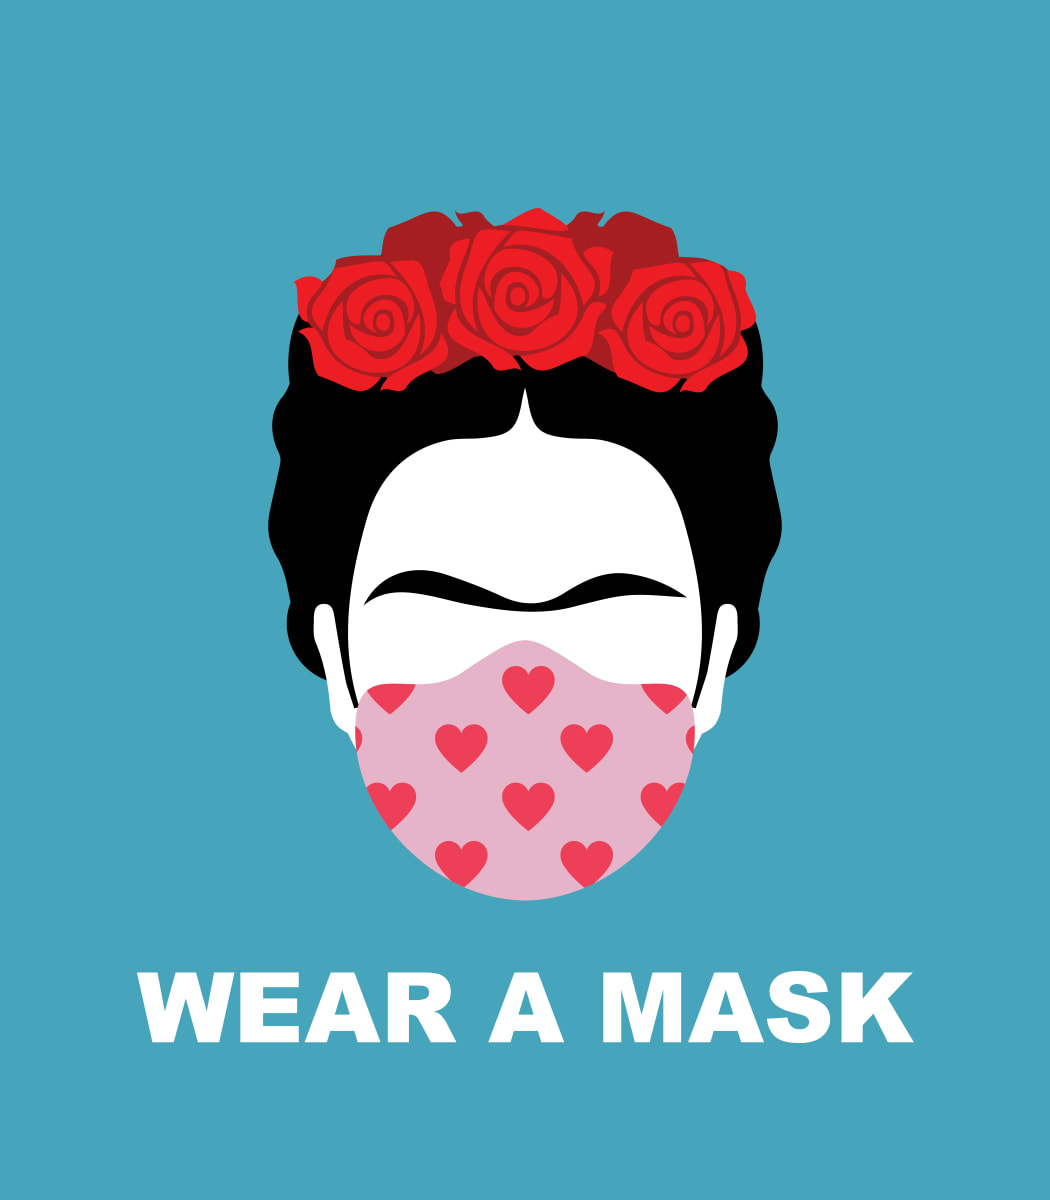 Mask PSA Campaign by Bernice Merced  Image: Design + Illustration for art prints, T-shirts, and other print novelties to encourage face mask usage.